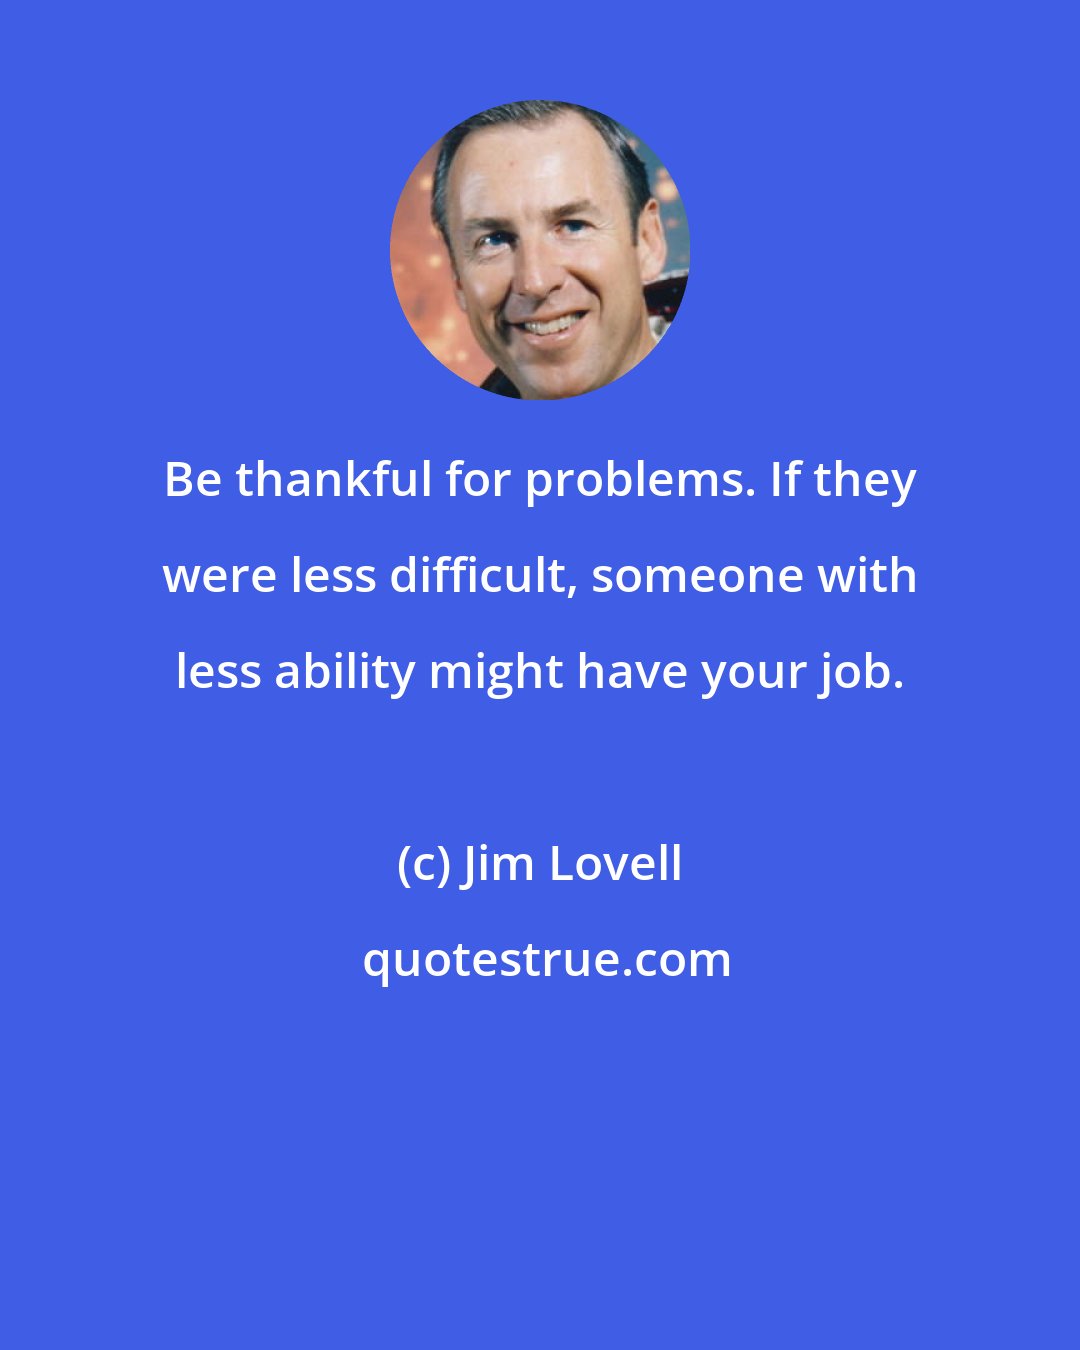 Jim Lovell: Be thankful for problems. If they were less difficult, someone with less ability might have your job.